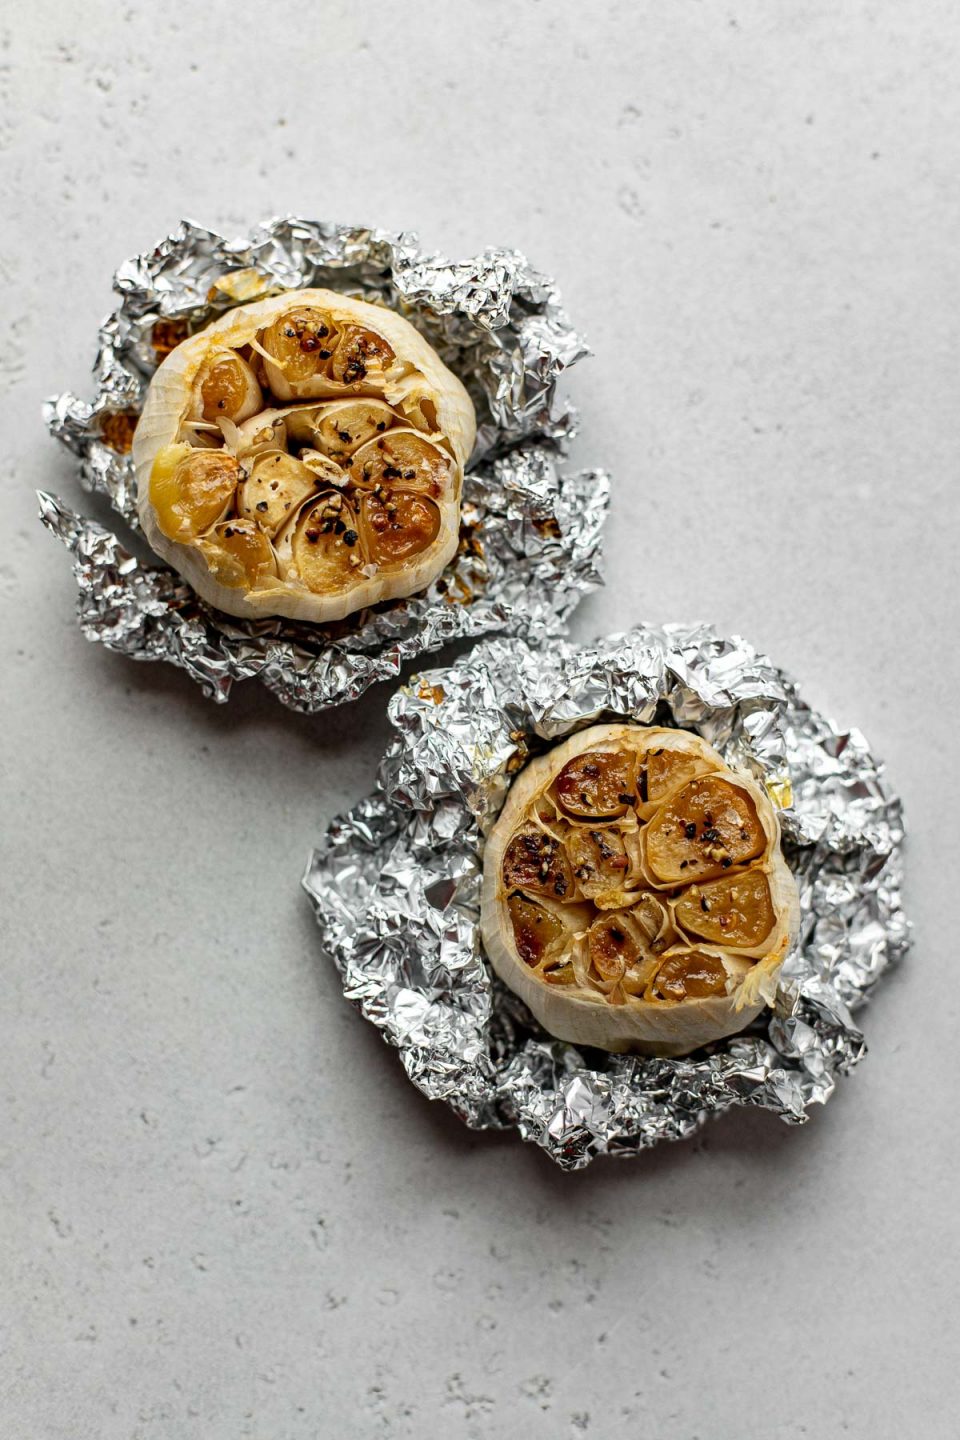 Two heads of roasted garlic with their tops cut off are seasoned with olive oil, kosher salt and pepper rest atop sheets of crumpled aluminum foil. Each bundle of roasted garlic sits atop a creamy white textured surface.